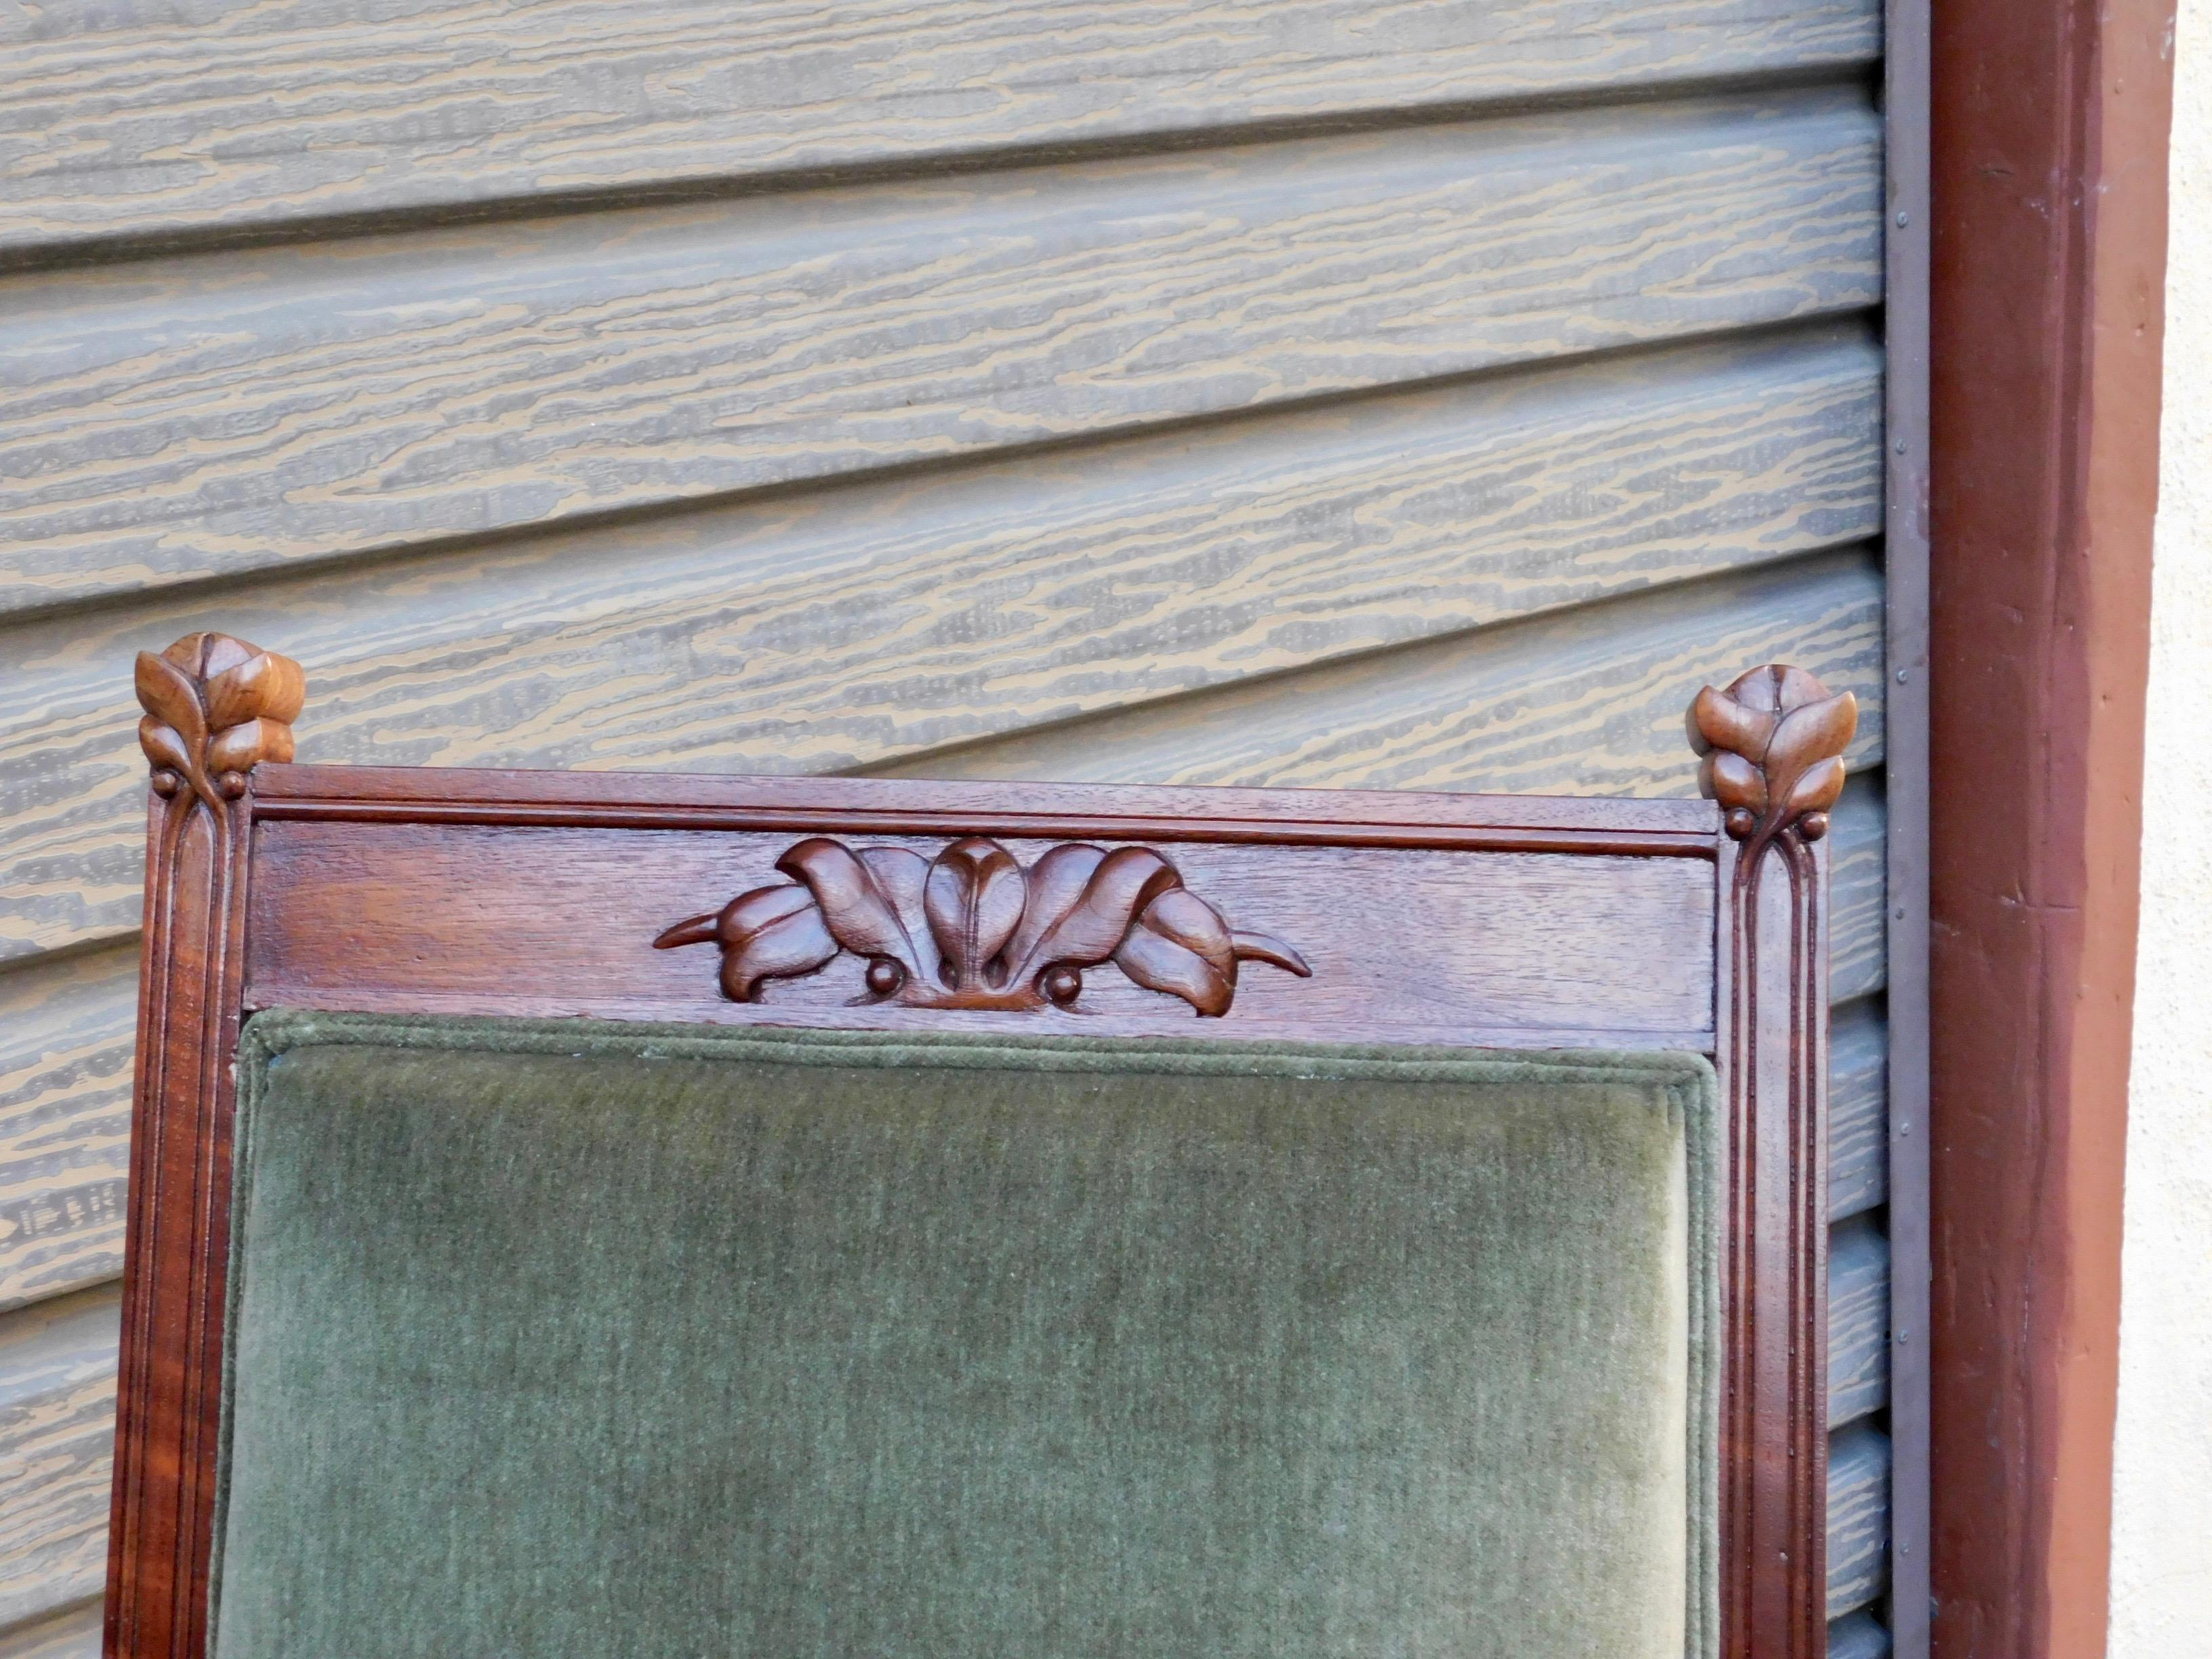 Swedish Arts & Crafts Paneled Chair with Carved Flora Motifs, circa 1900 For Sale 3